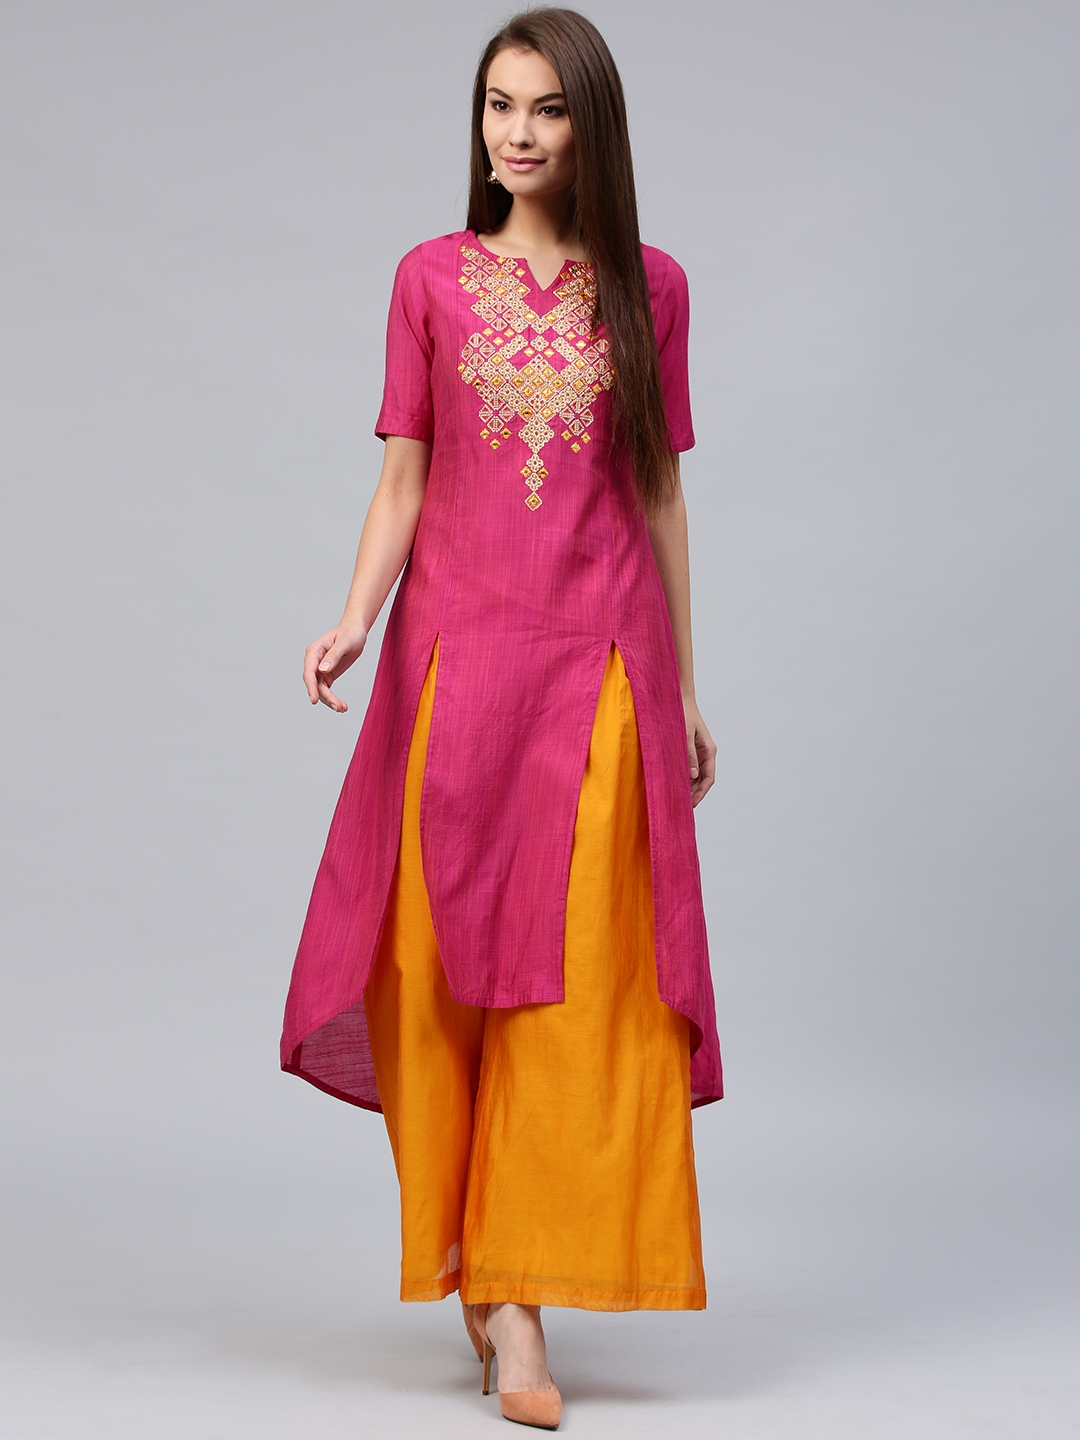 Vibrant Yellow and Pink Doll Short Cotton Kurti for Women